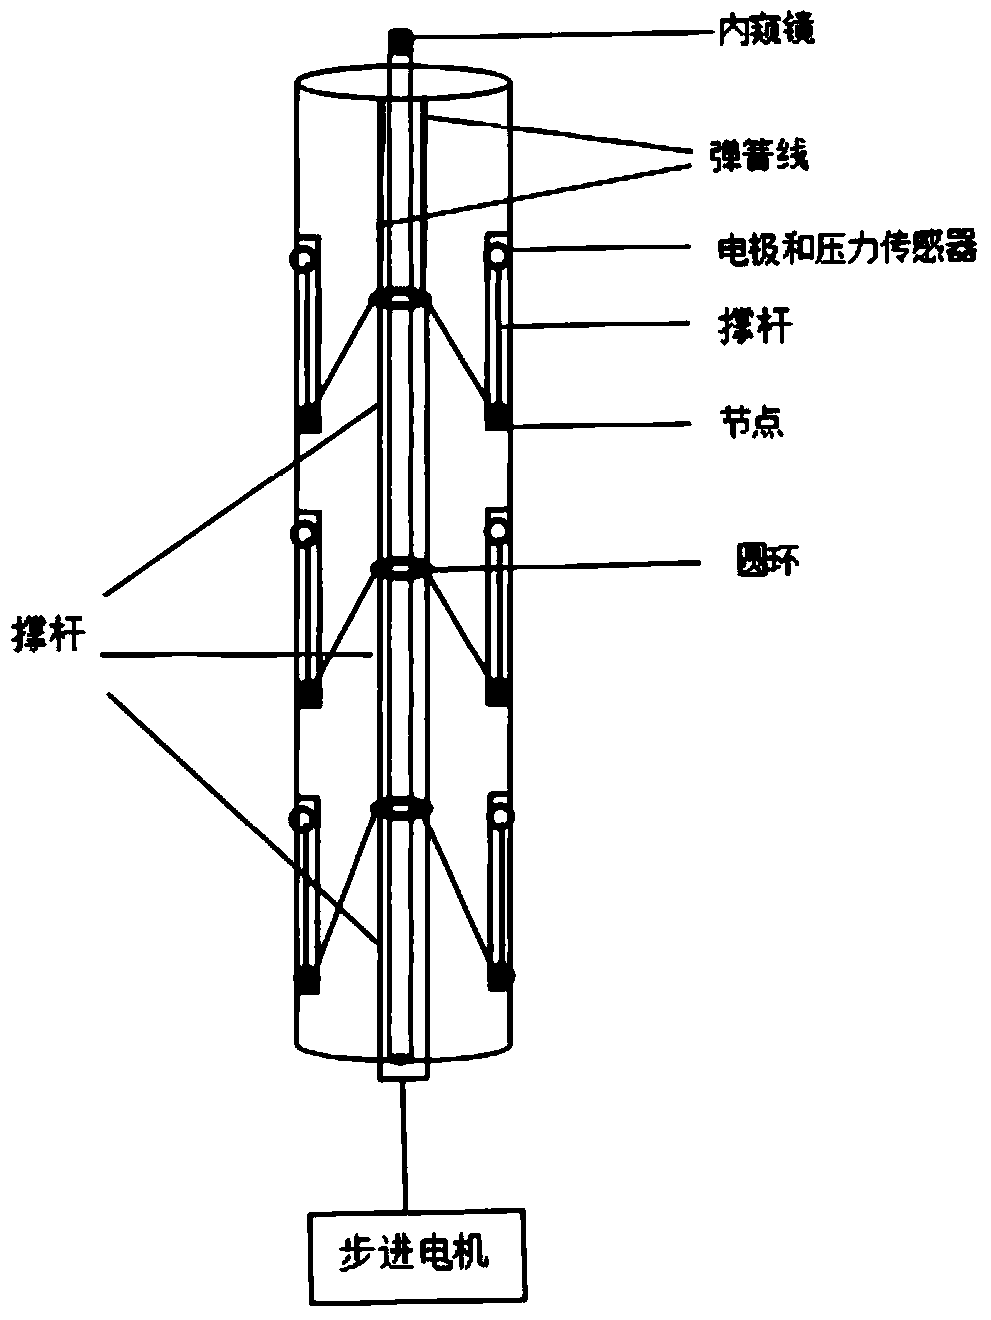 Minimally invasive supporting type rectum electrical impedance characteristic detecting device